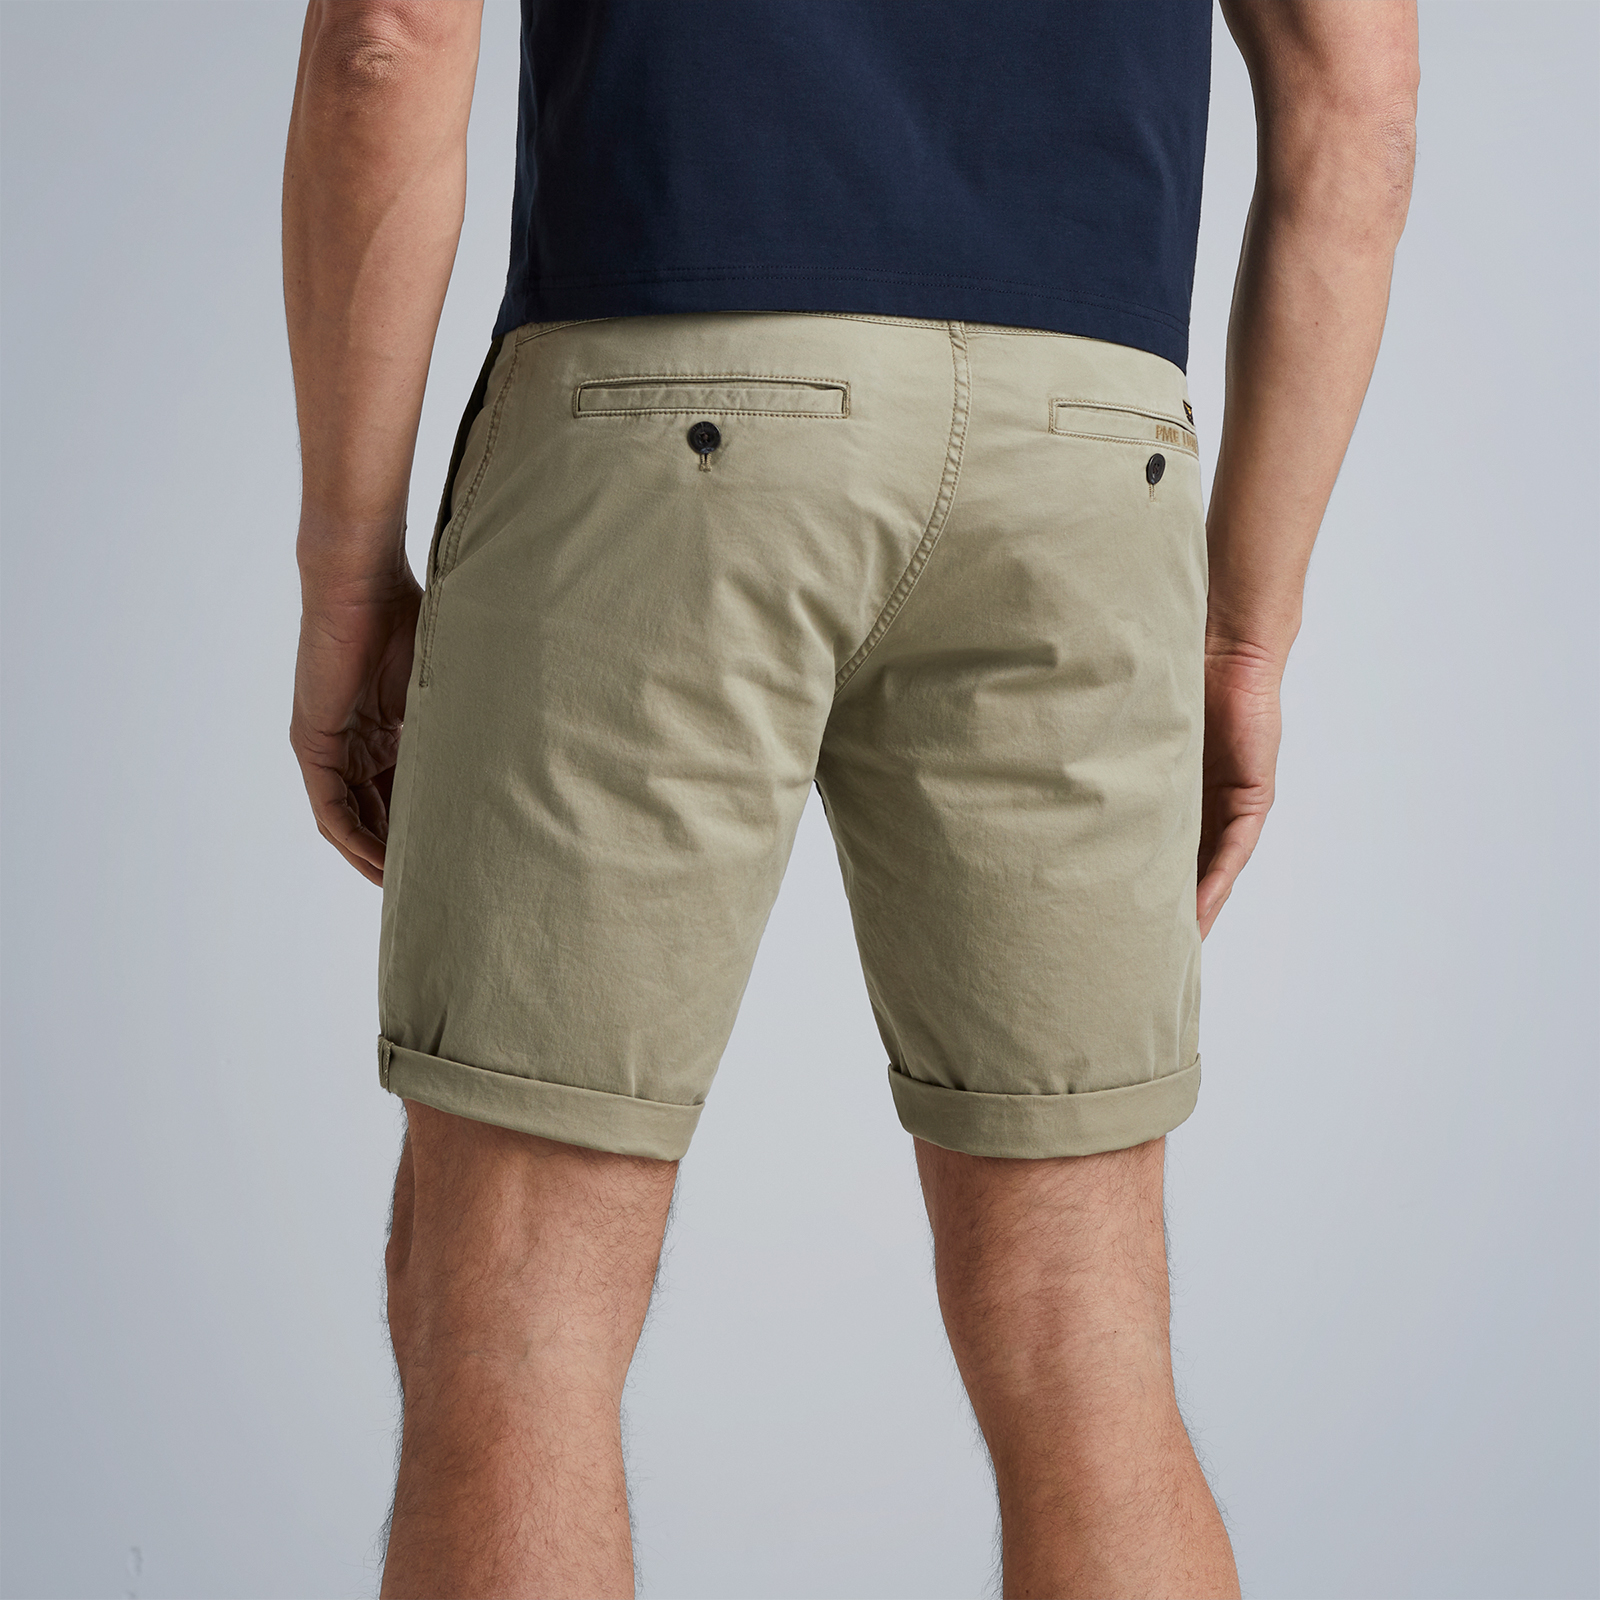 PME LEGEND | Interwing Stretch Twill Short | Free shipping and returns